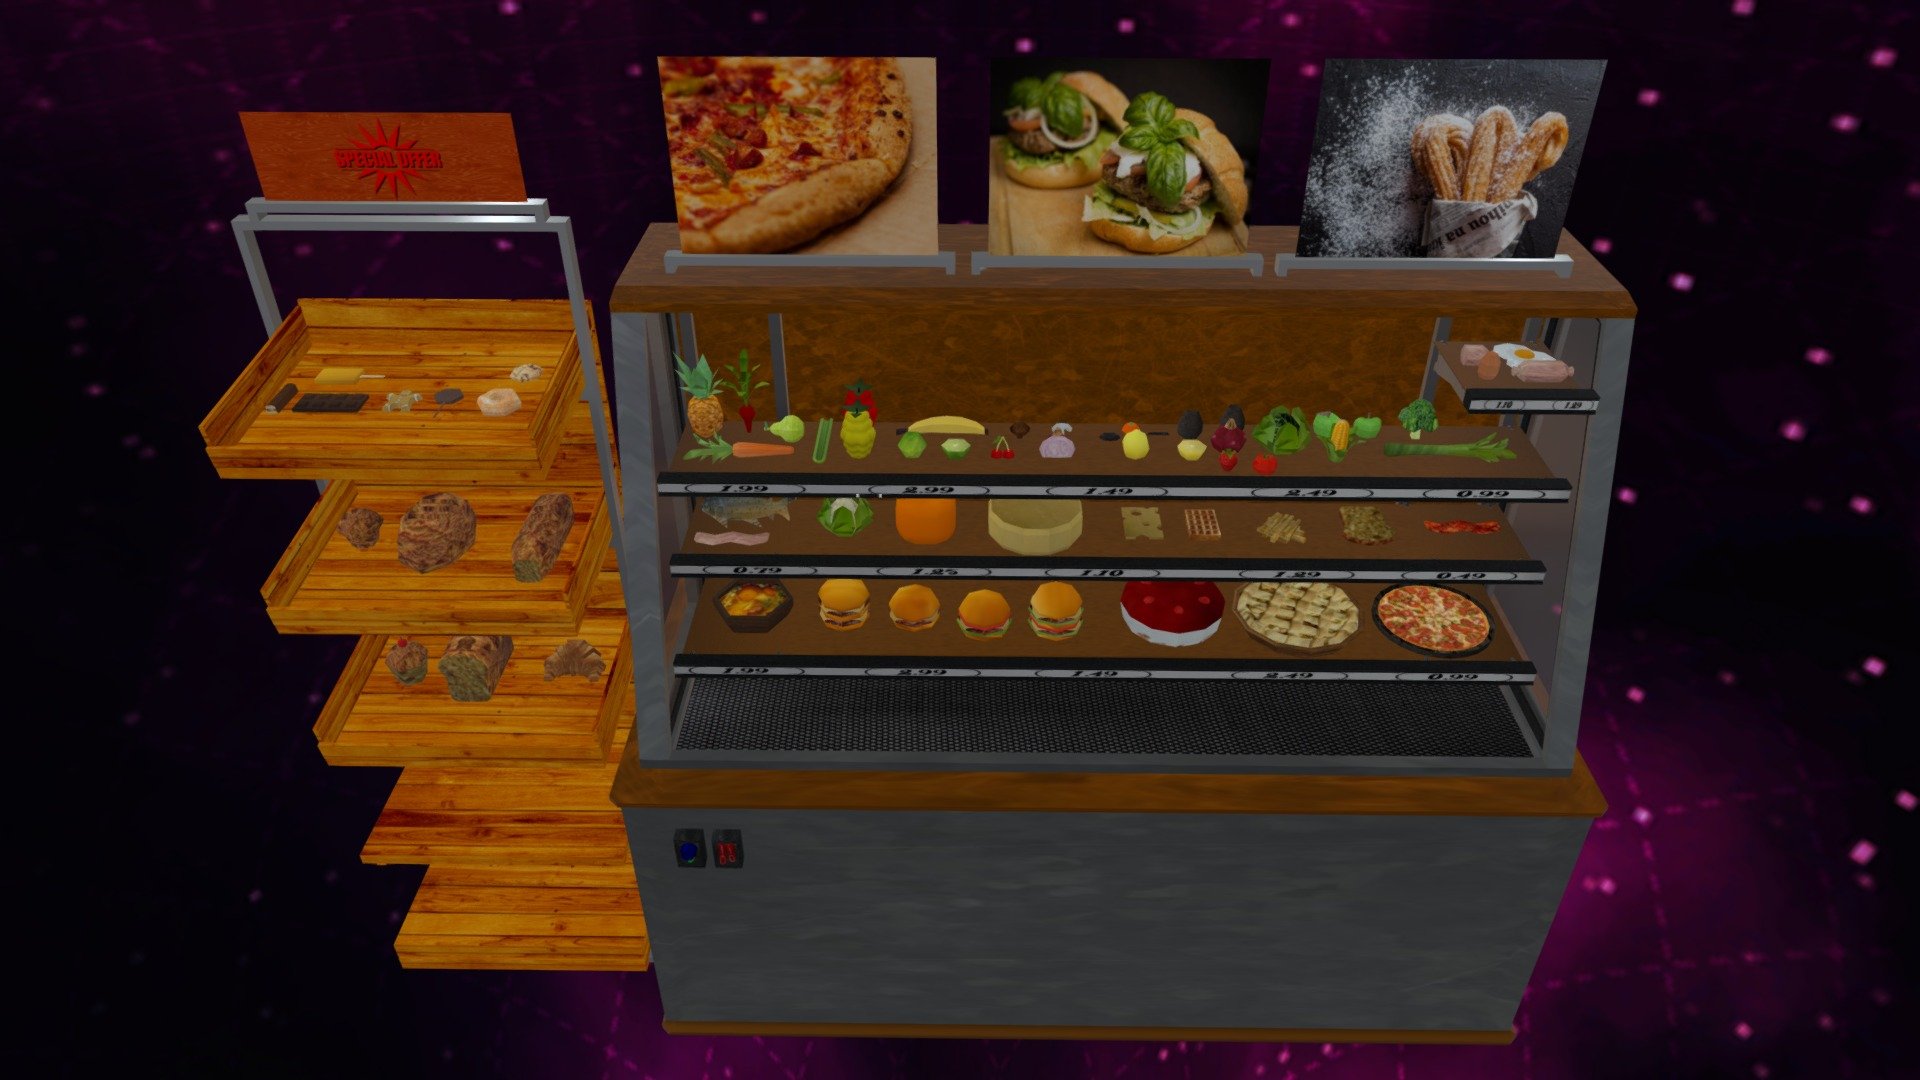 Introducing the Real Food Set made by ACBRadio, the programs used to make this object are as follows: Blender 2.93 &amp; G.I.M.P 2.10.4…The ‘Textures’ inclued in this object are the following: Diffuse…Textures are obtained from https://cc0textures.com/list?sort=Popular …free of Charge

Backdrop image by Micah Boerma over on https://www.pexels.com 
Food images are obtained from Pexels and https://pixabay.com

360 backdrop’s total poly count: Triangles: 4k Vertices: 2k

:D - Real Food Set .Blend FREE Low Poly - Download Free 3D model by LordSamueliSolo (@LadyLionStudios) 3d model